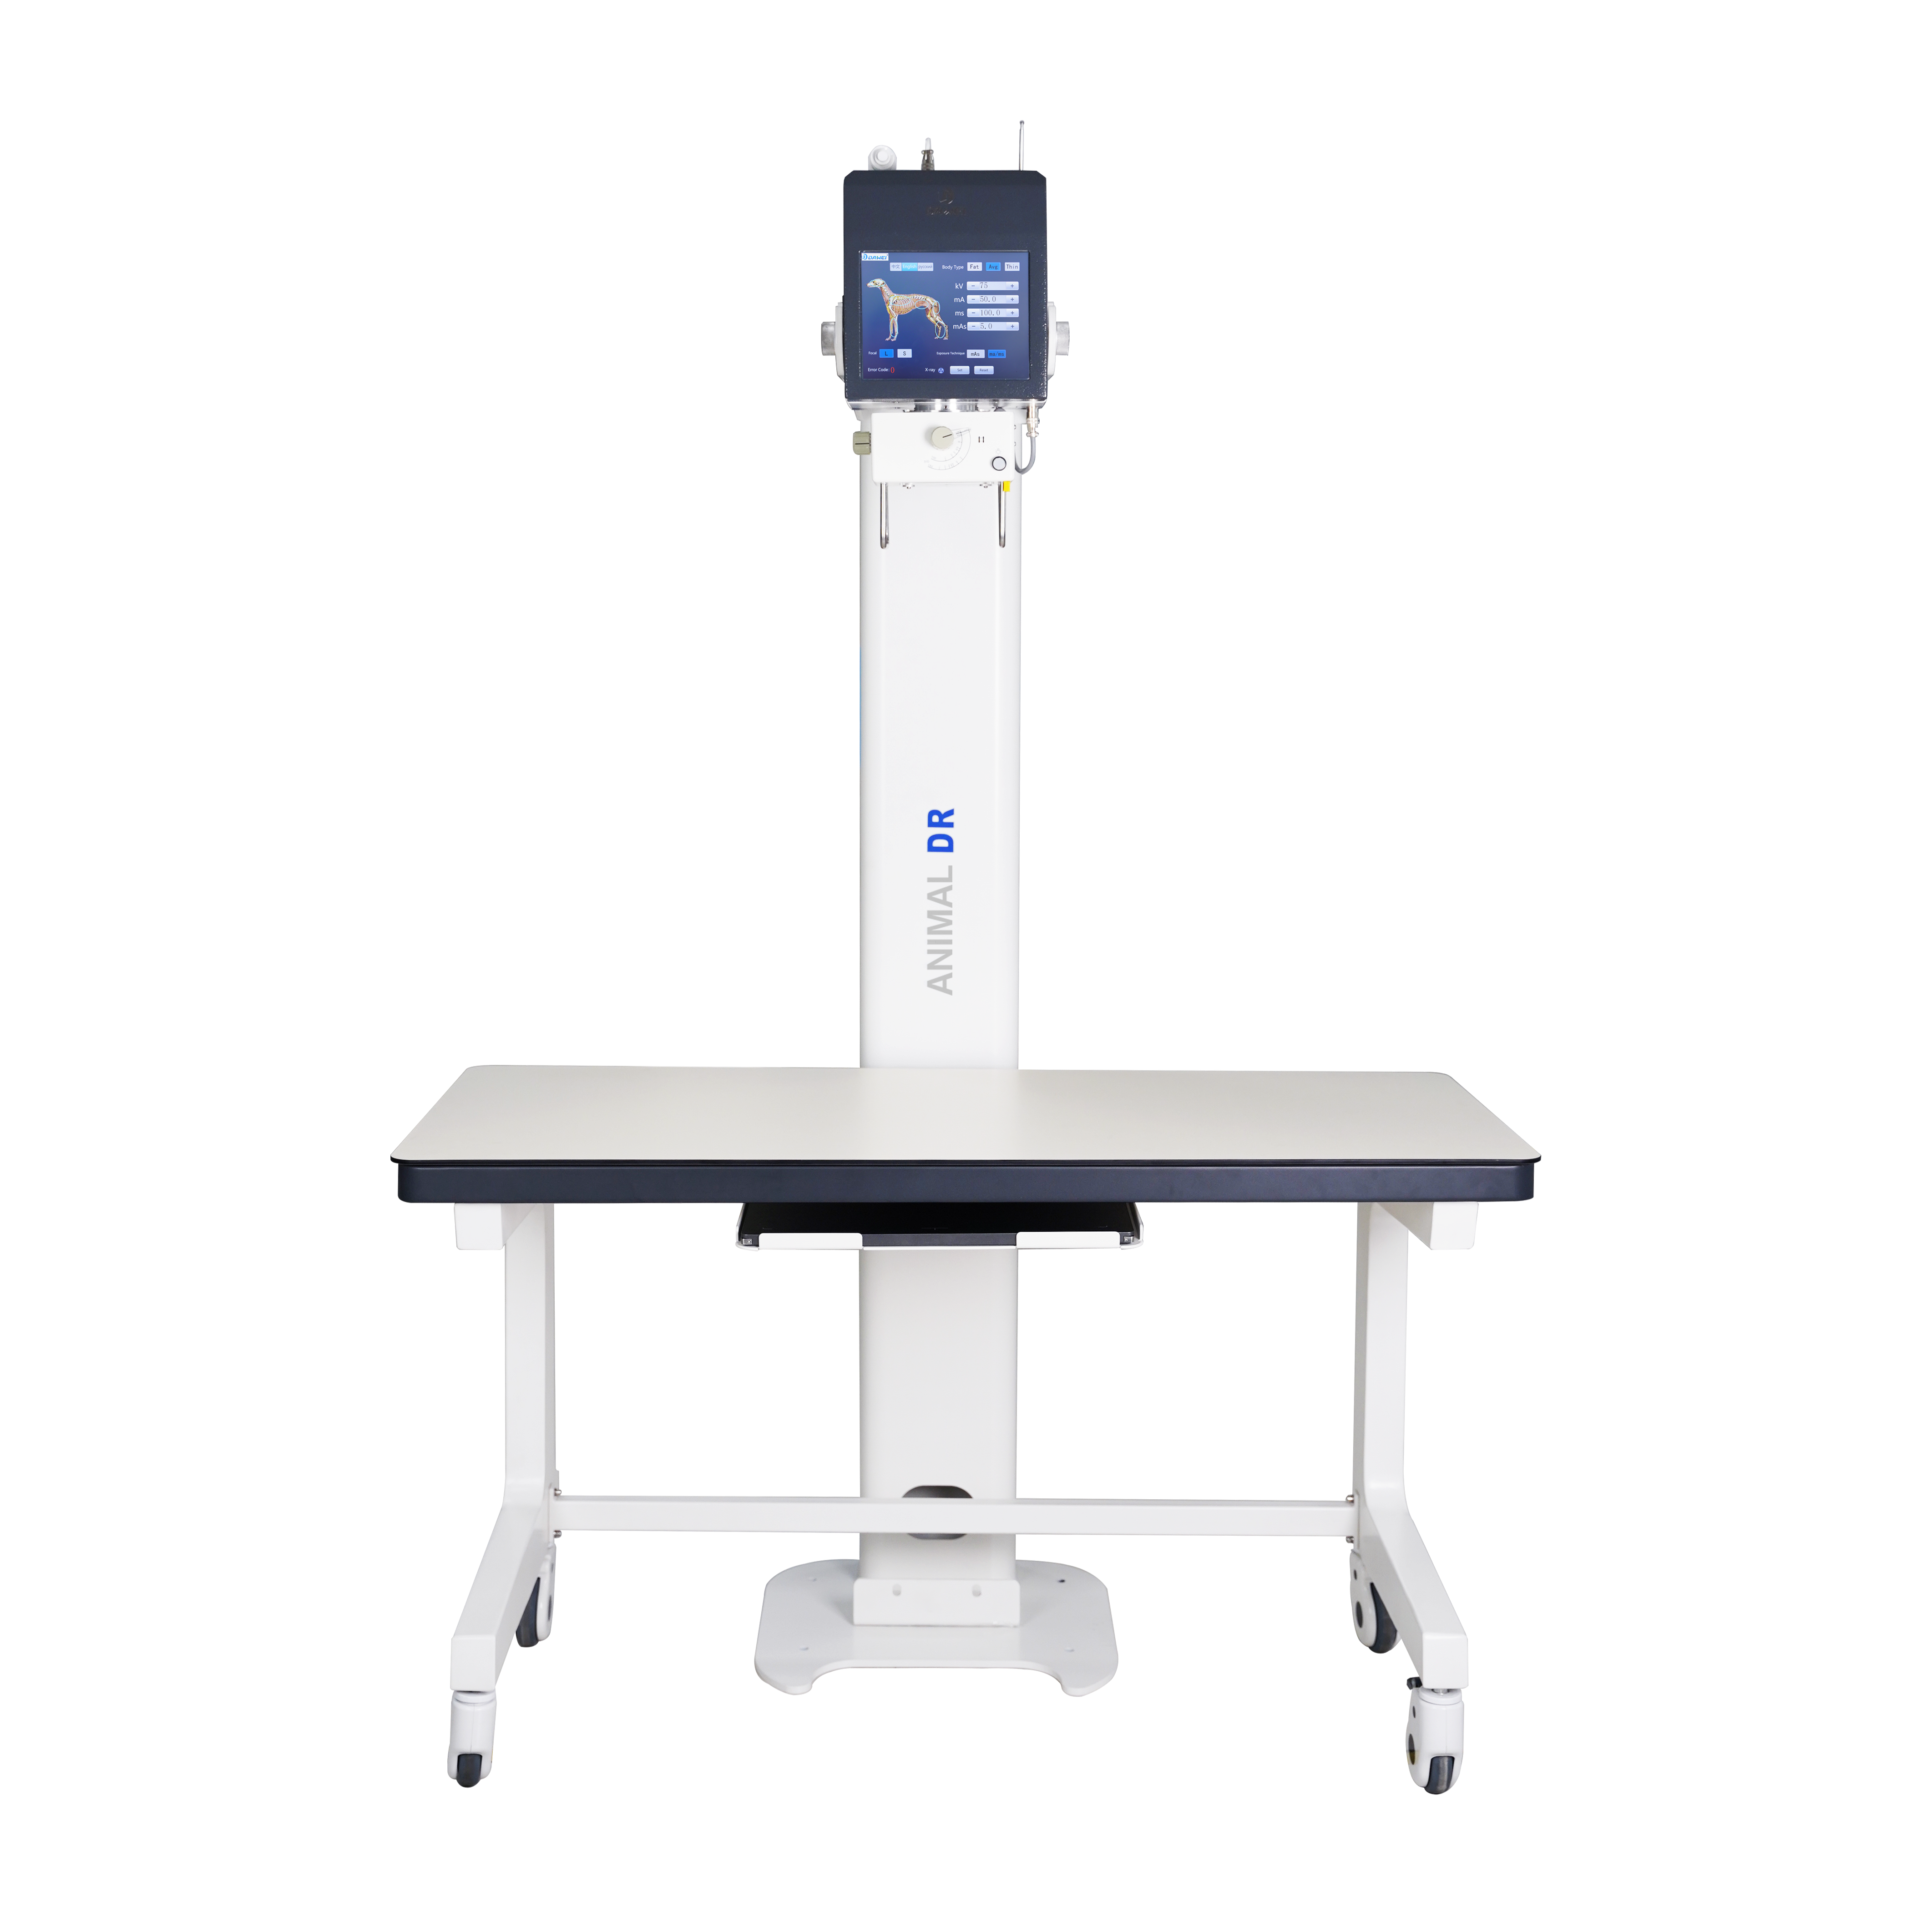 5kW Removable Animal Digital X-ray Radiography System Featured Image